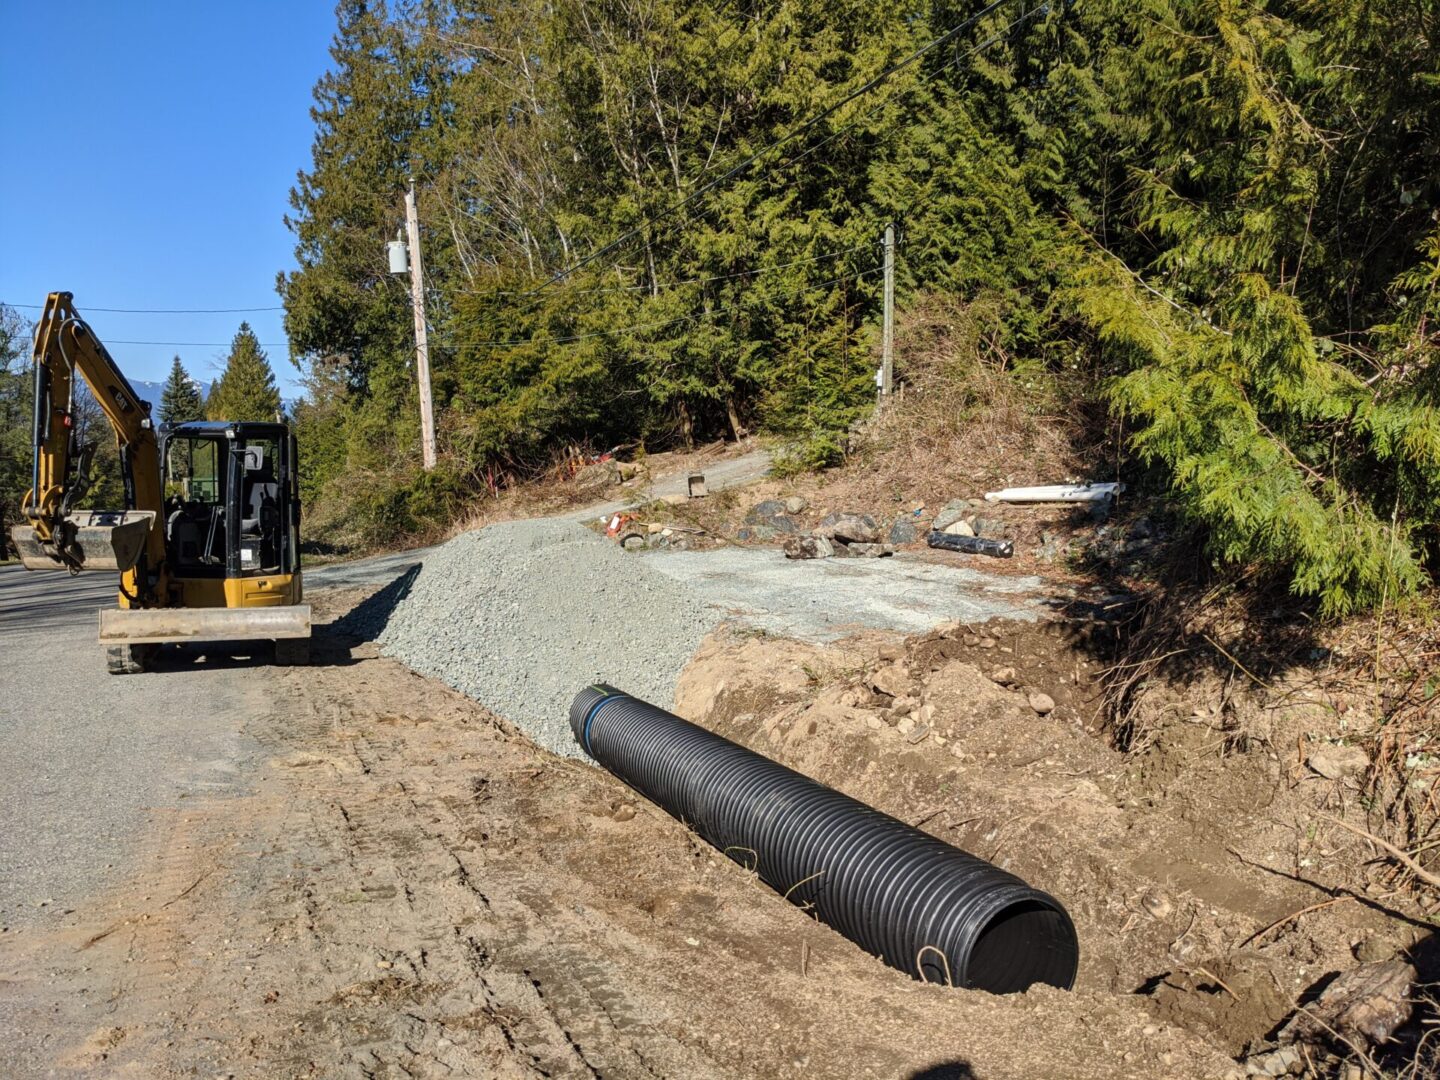 A construction site with a backhoe, a pile of gravel, and a large black drainage pipe next to a road in a wooded area.